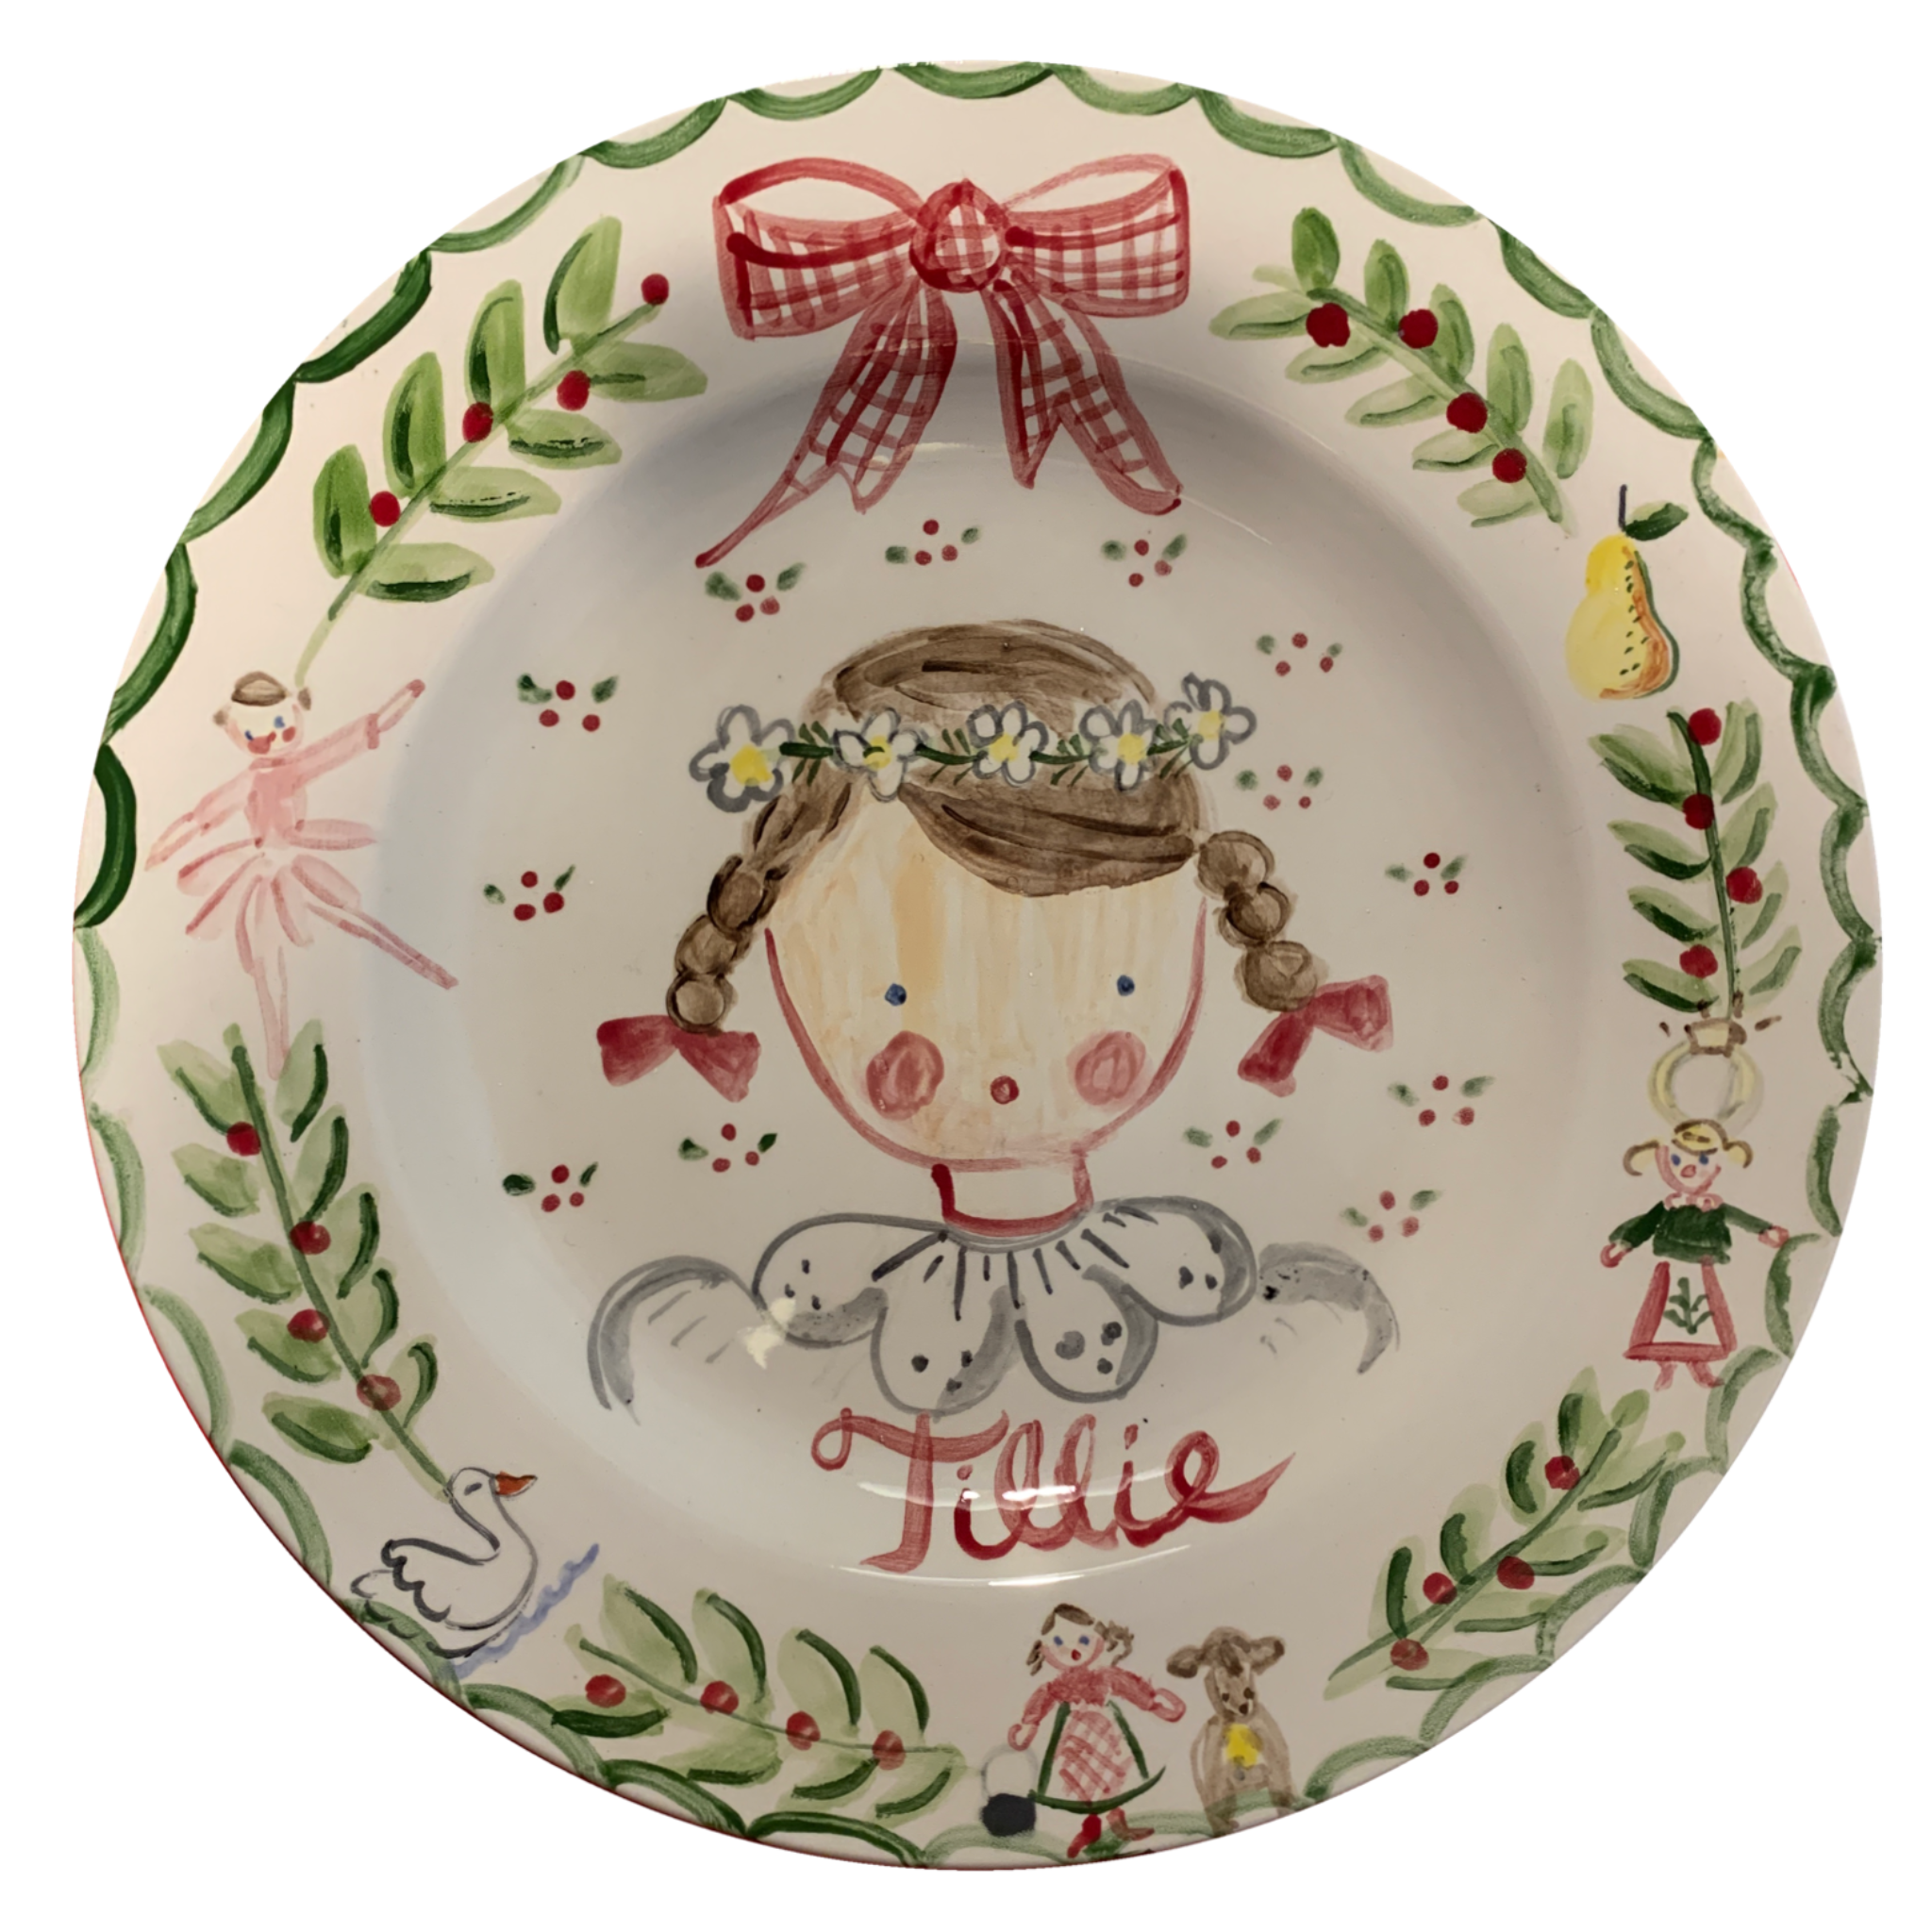 Tricia Lowenfield  - 12 Days of Christmas Plate - Girl - Premium  from Tricia Lowenfield Design 